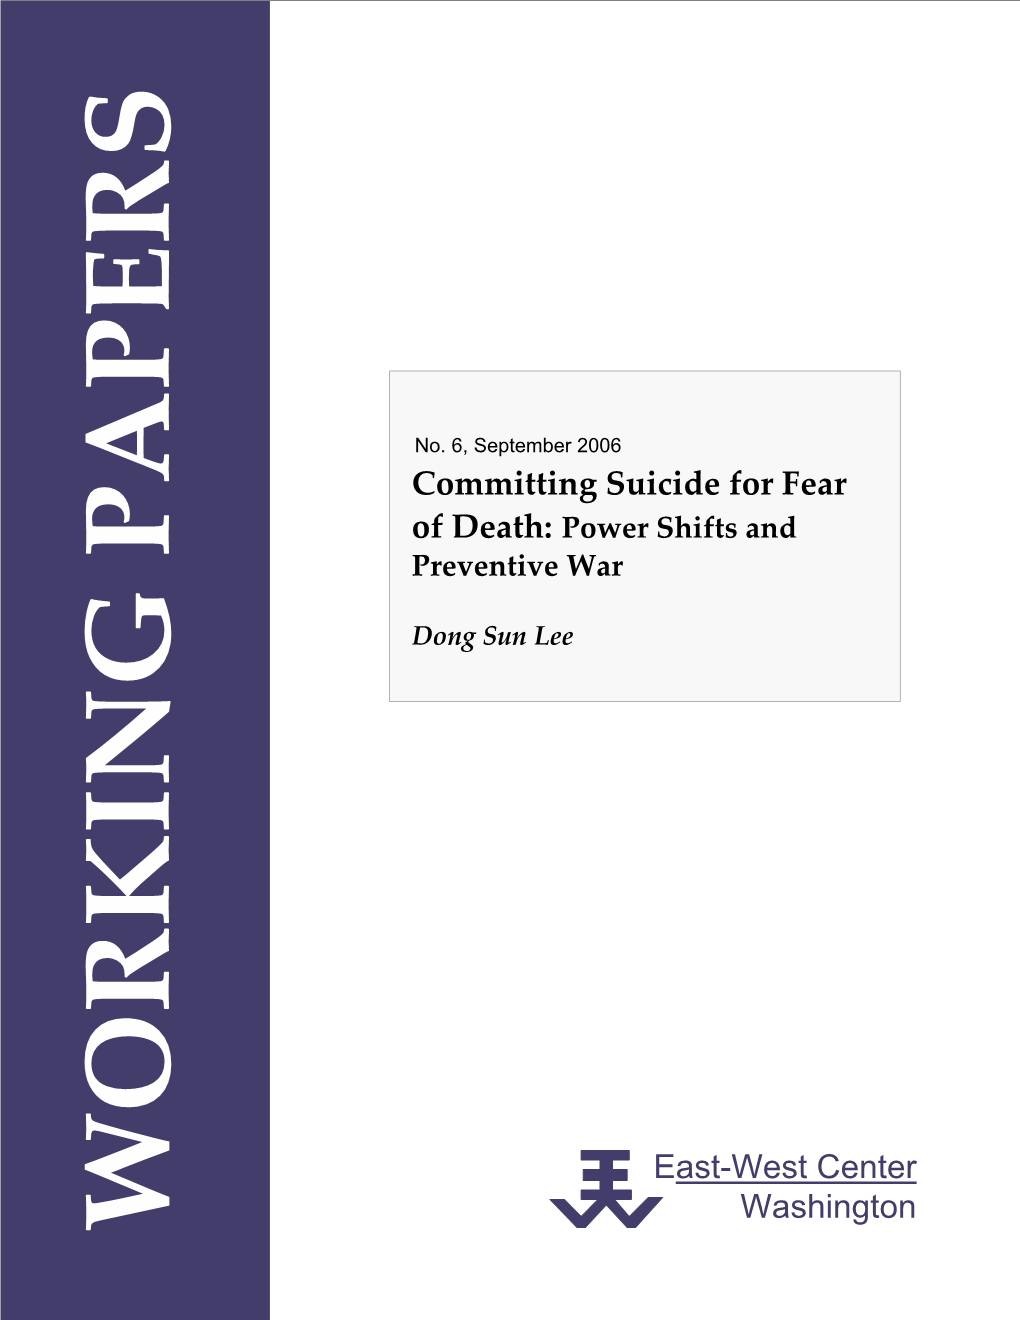 Committing Suicide for Fear of Death:Power Shifts and Preventive